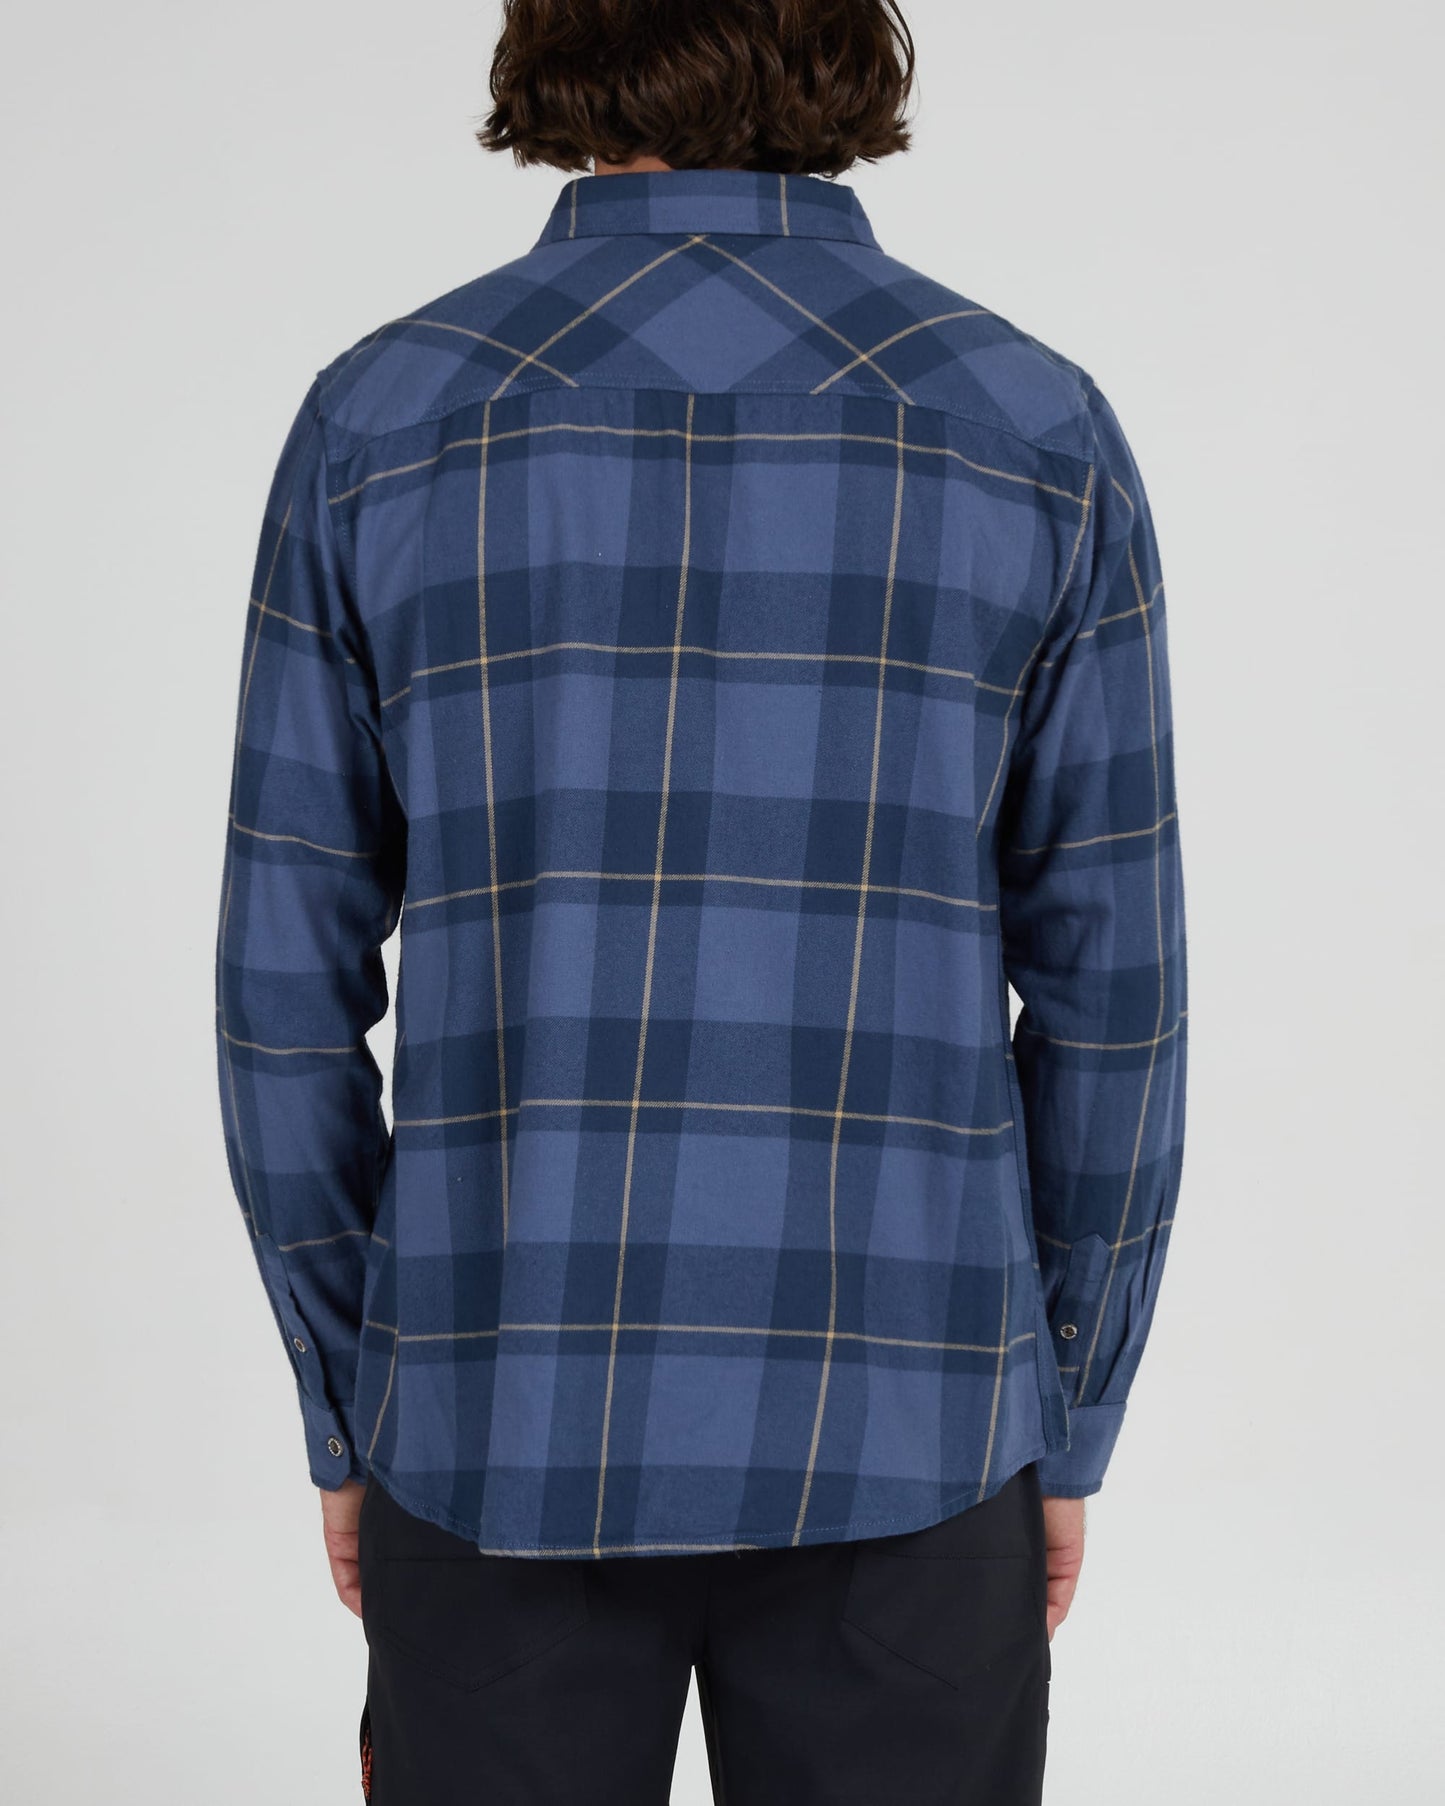 Salty crew WOVEN SHIRTS FIRST LIGHT FLANNEL - NAVY/BLUE in NAVY/BLUE